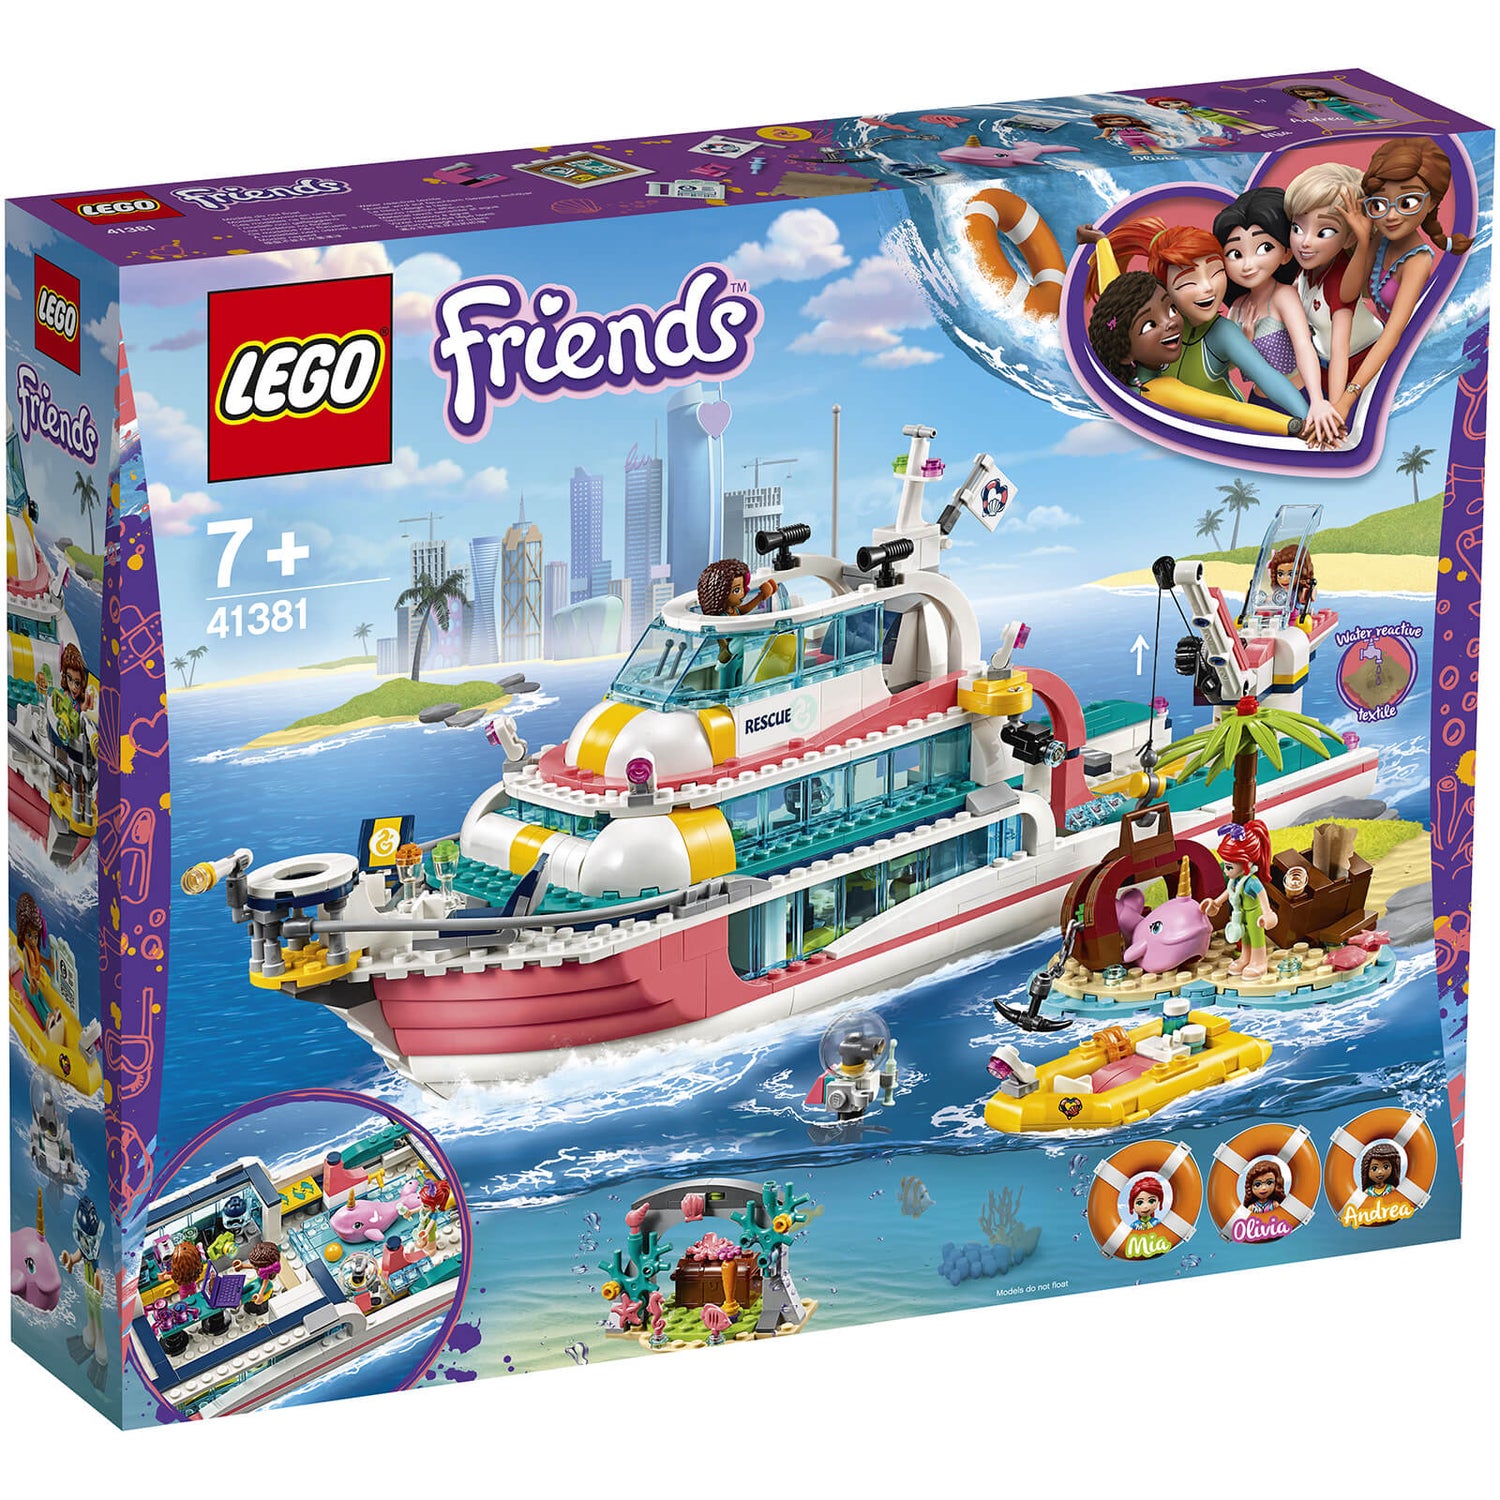 LEGO 41381 Friends Rescue Mission Boat Toy Sea Life Set Building Xmas New Gift 